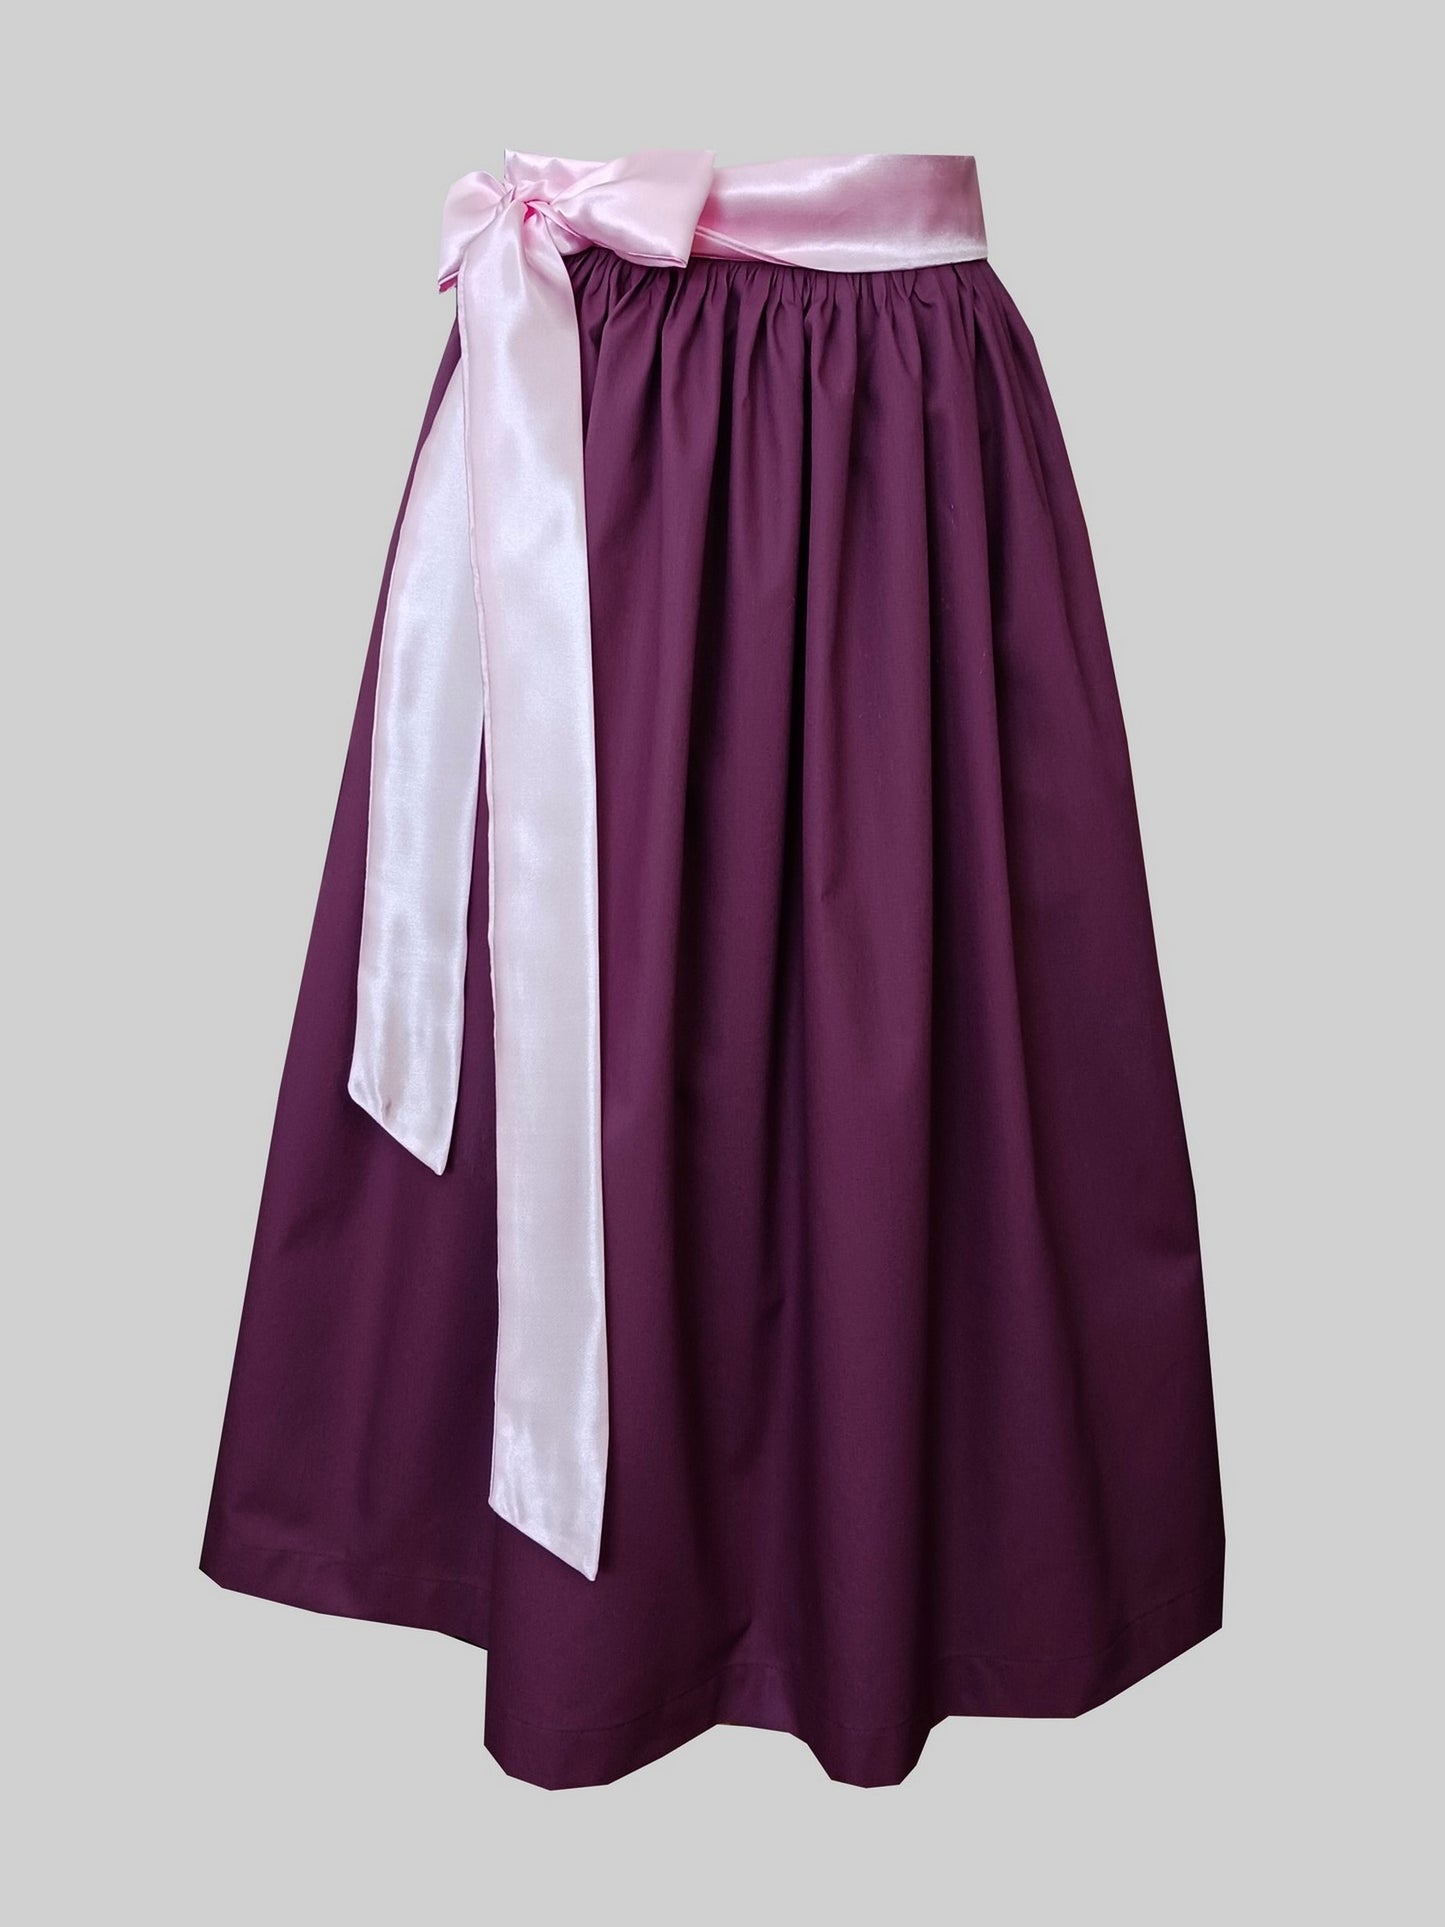 Ladies dirndl apron with contrasting ribbons plum old pink M/70cm > Buy it now